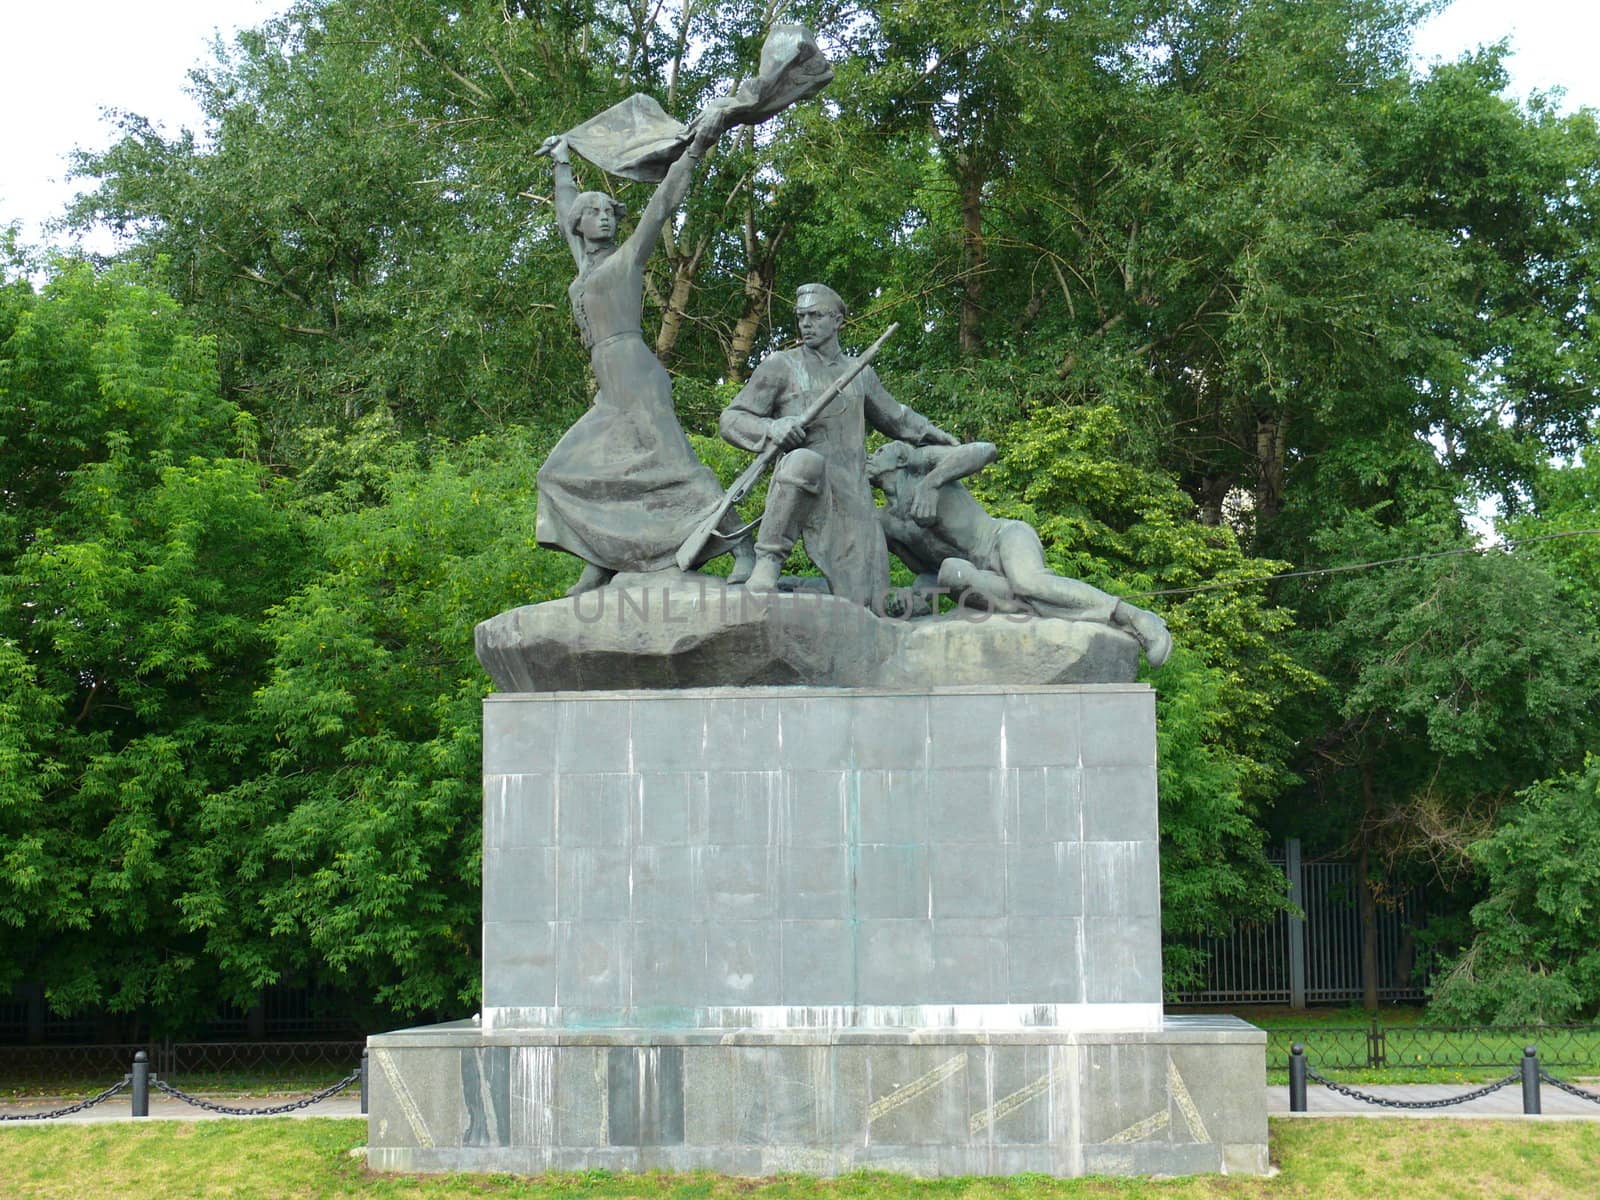 Monument to Barricade fighters in Krasnaya presnya - Moscow